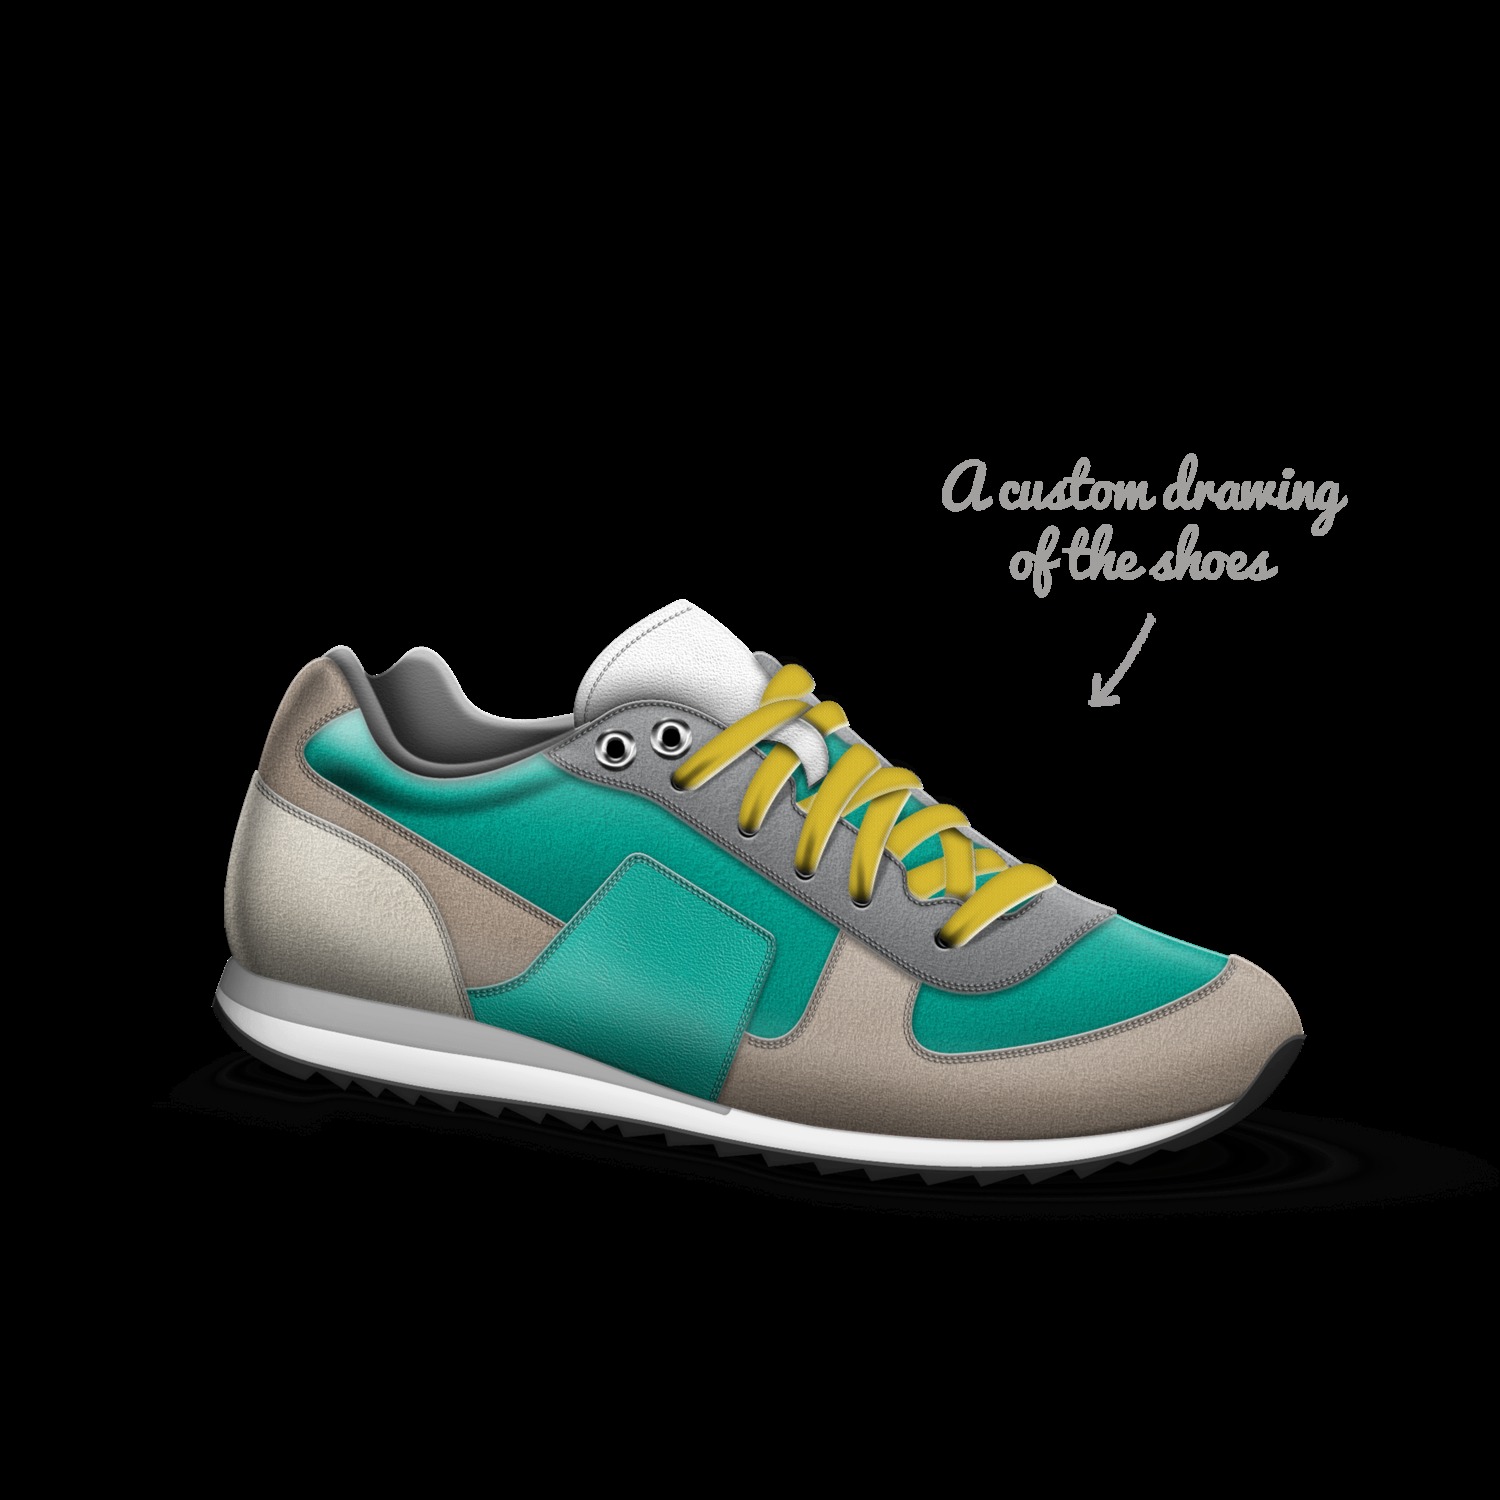 ASUS | A Custom Shoe concept by Aman Verma